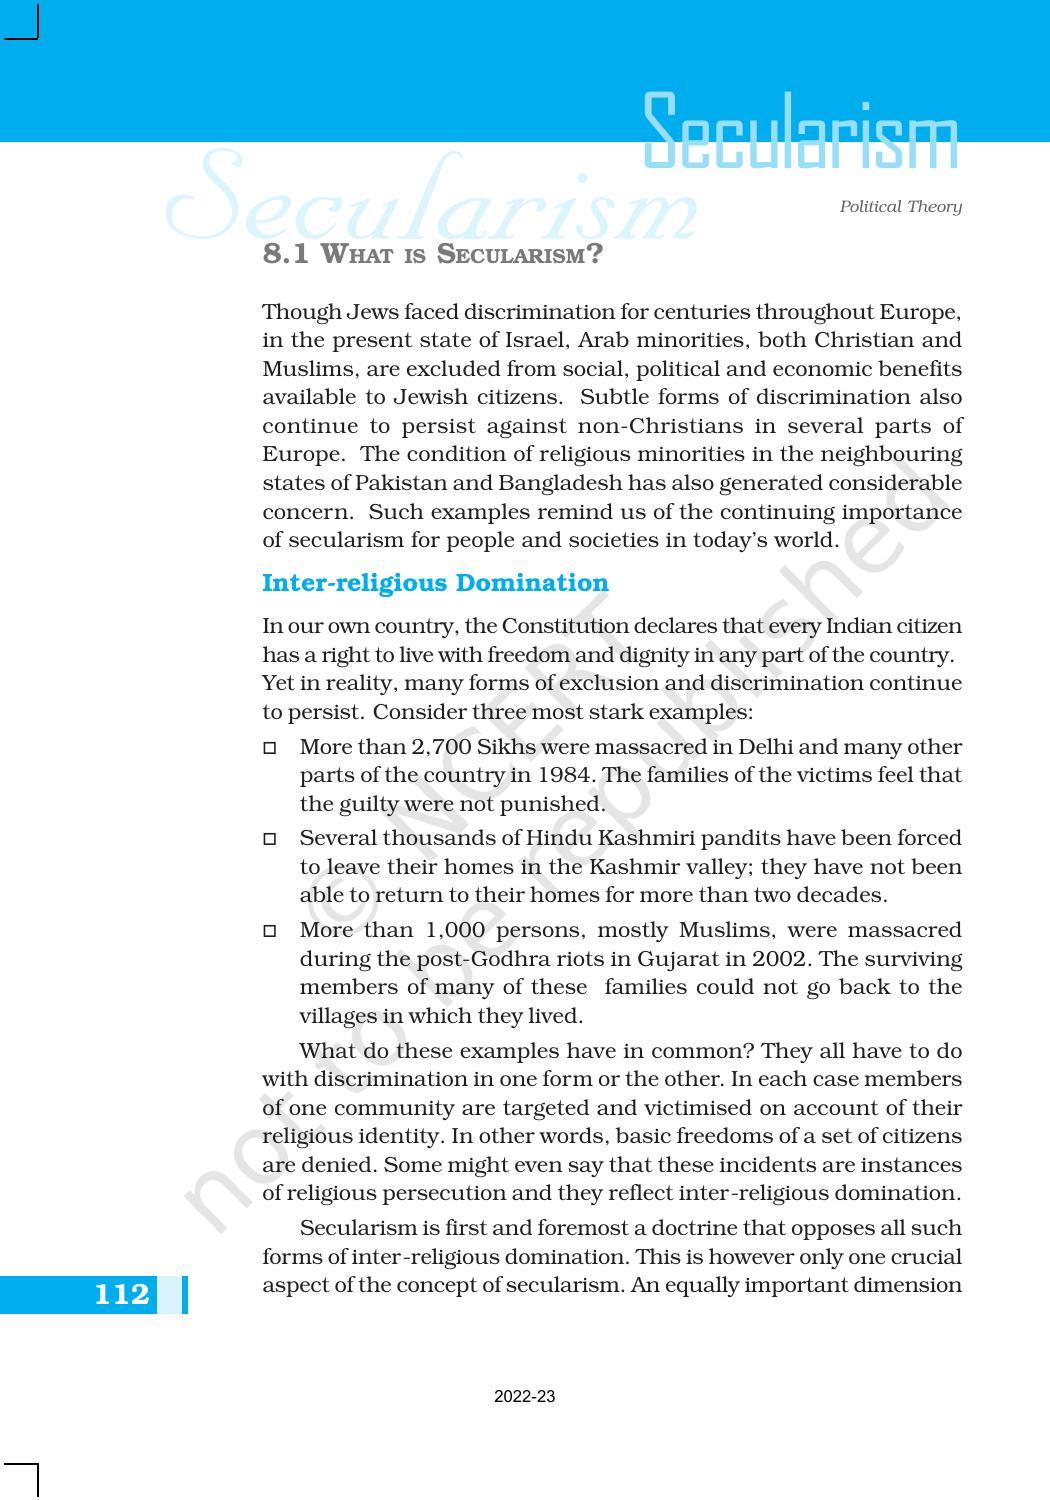 NCERT Book for Class 11 Political Science (Political Theory) Chapter 8 Secularism - Page 2